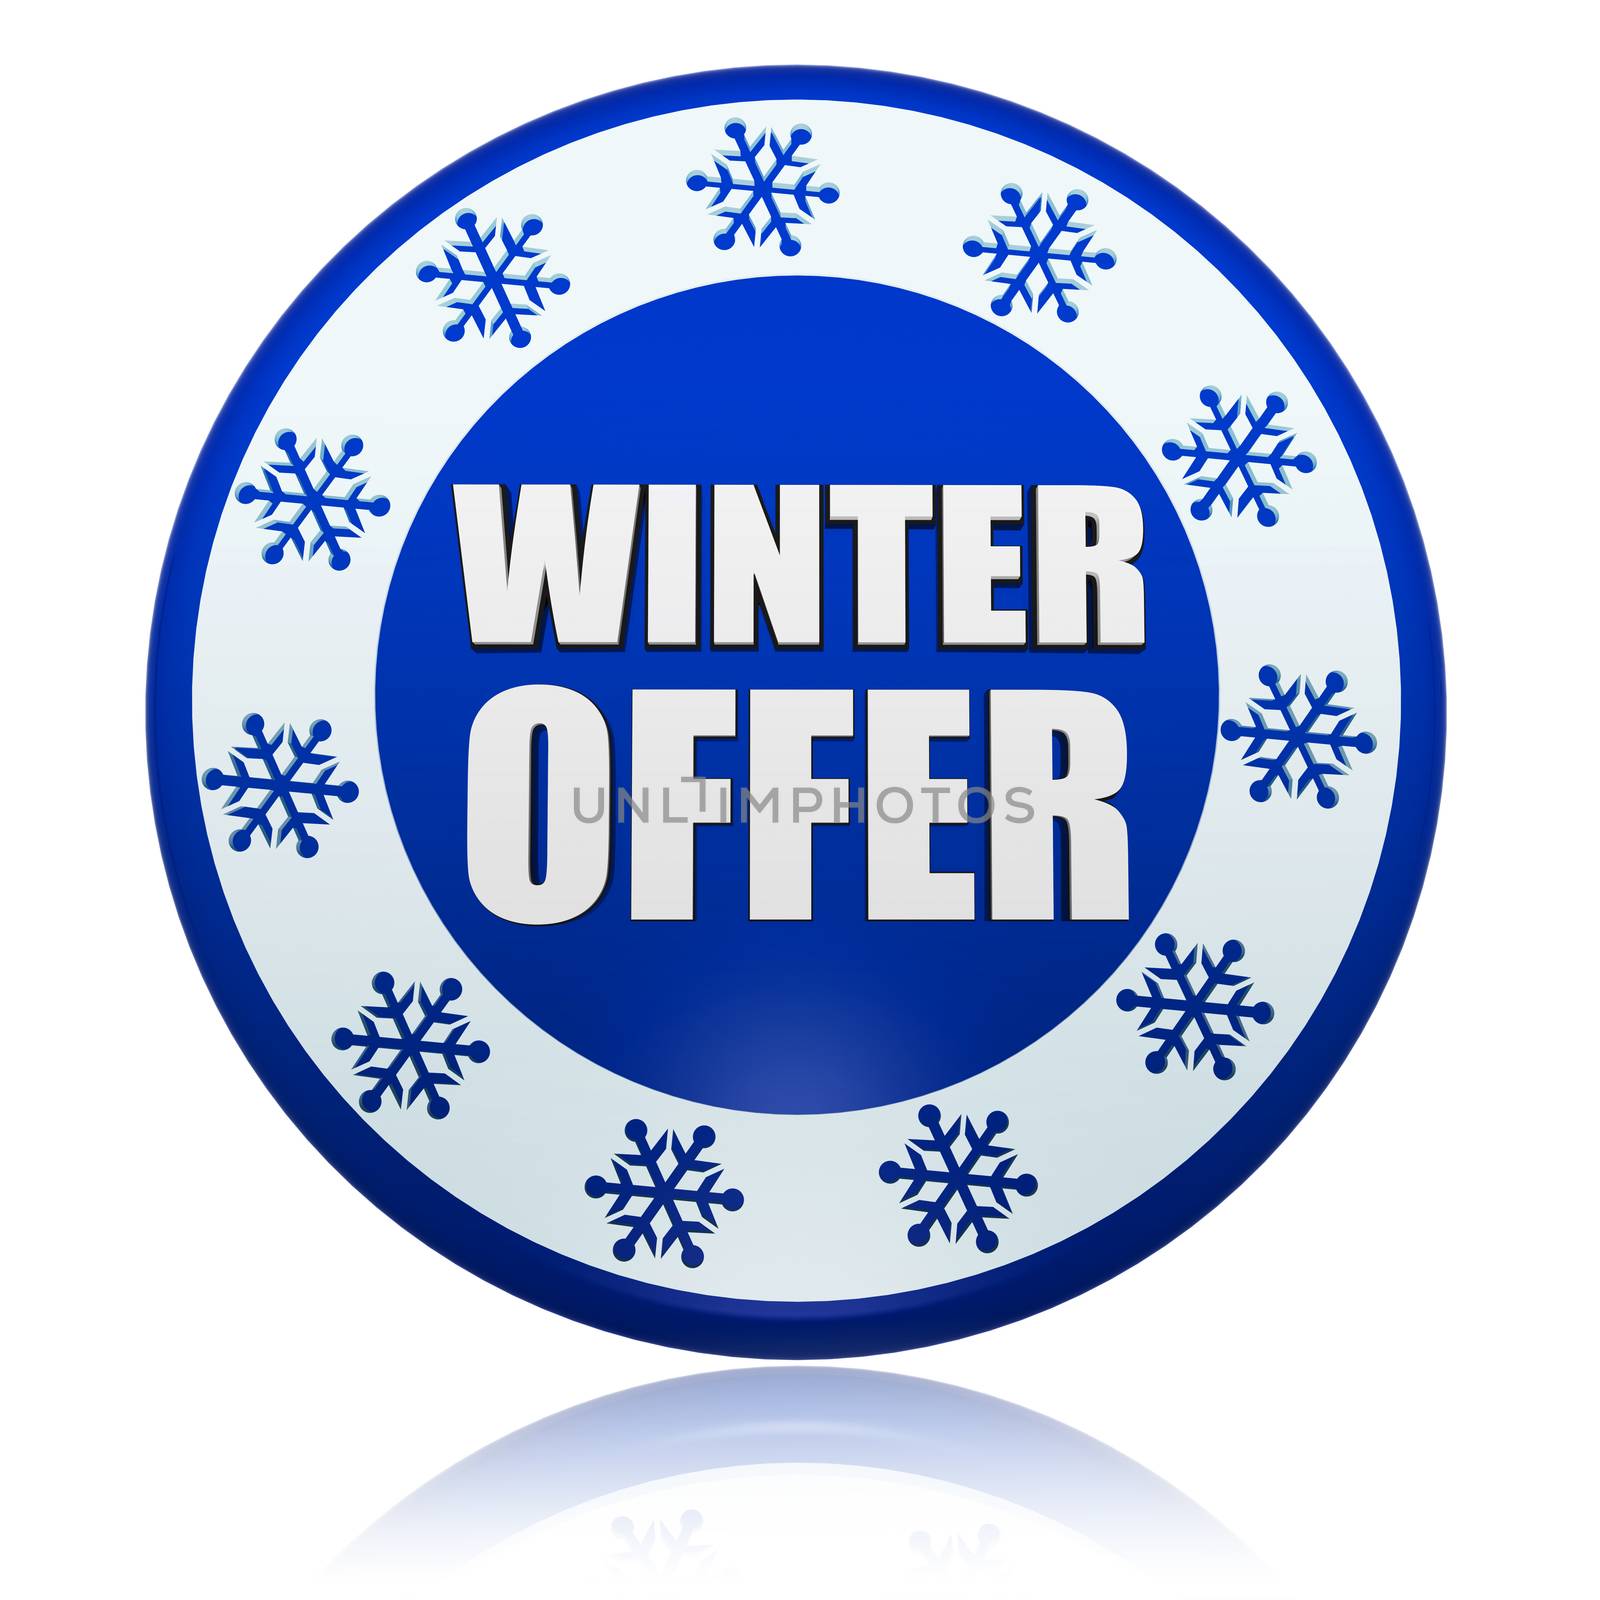 winter offer - 3d blue circle banner with white text and snowflakes symbols, business seasonal concept